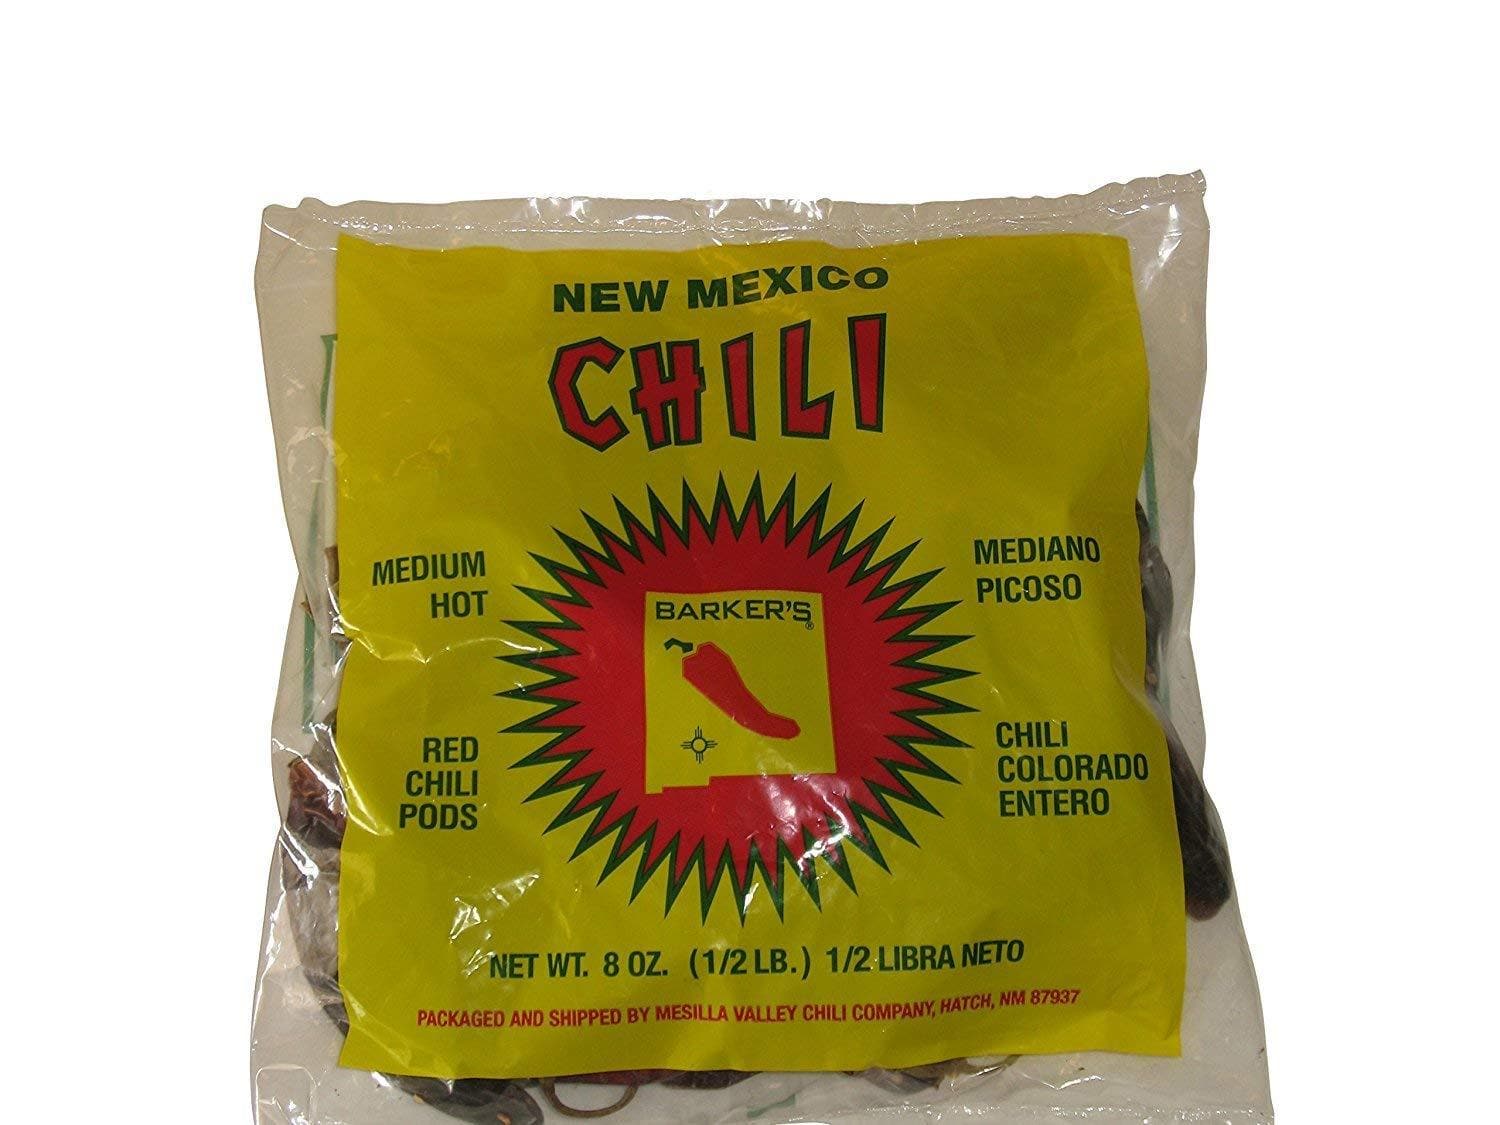 A package of Dried Hatch Red Chile Pods, labeled "medium hot" and "mediano picoso," containing red chili pods with a vibrant yellow and red design.